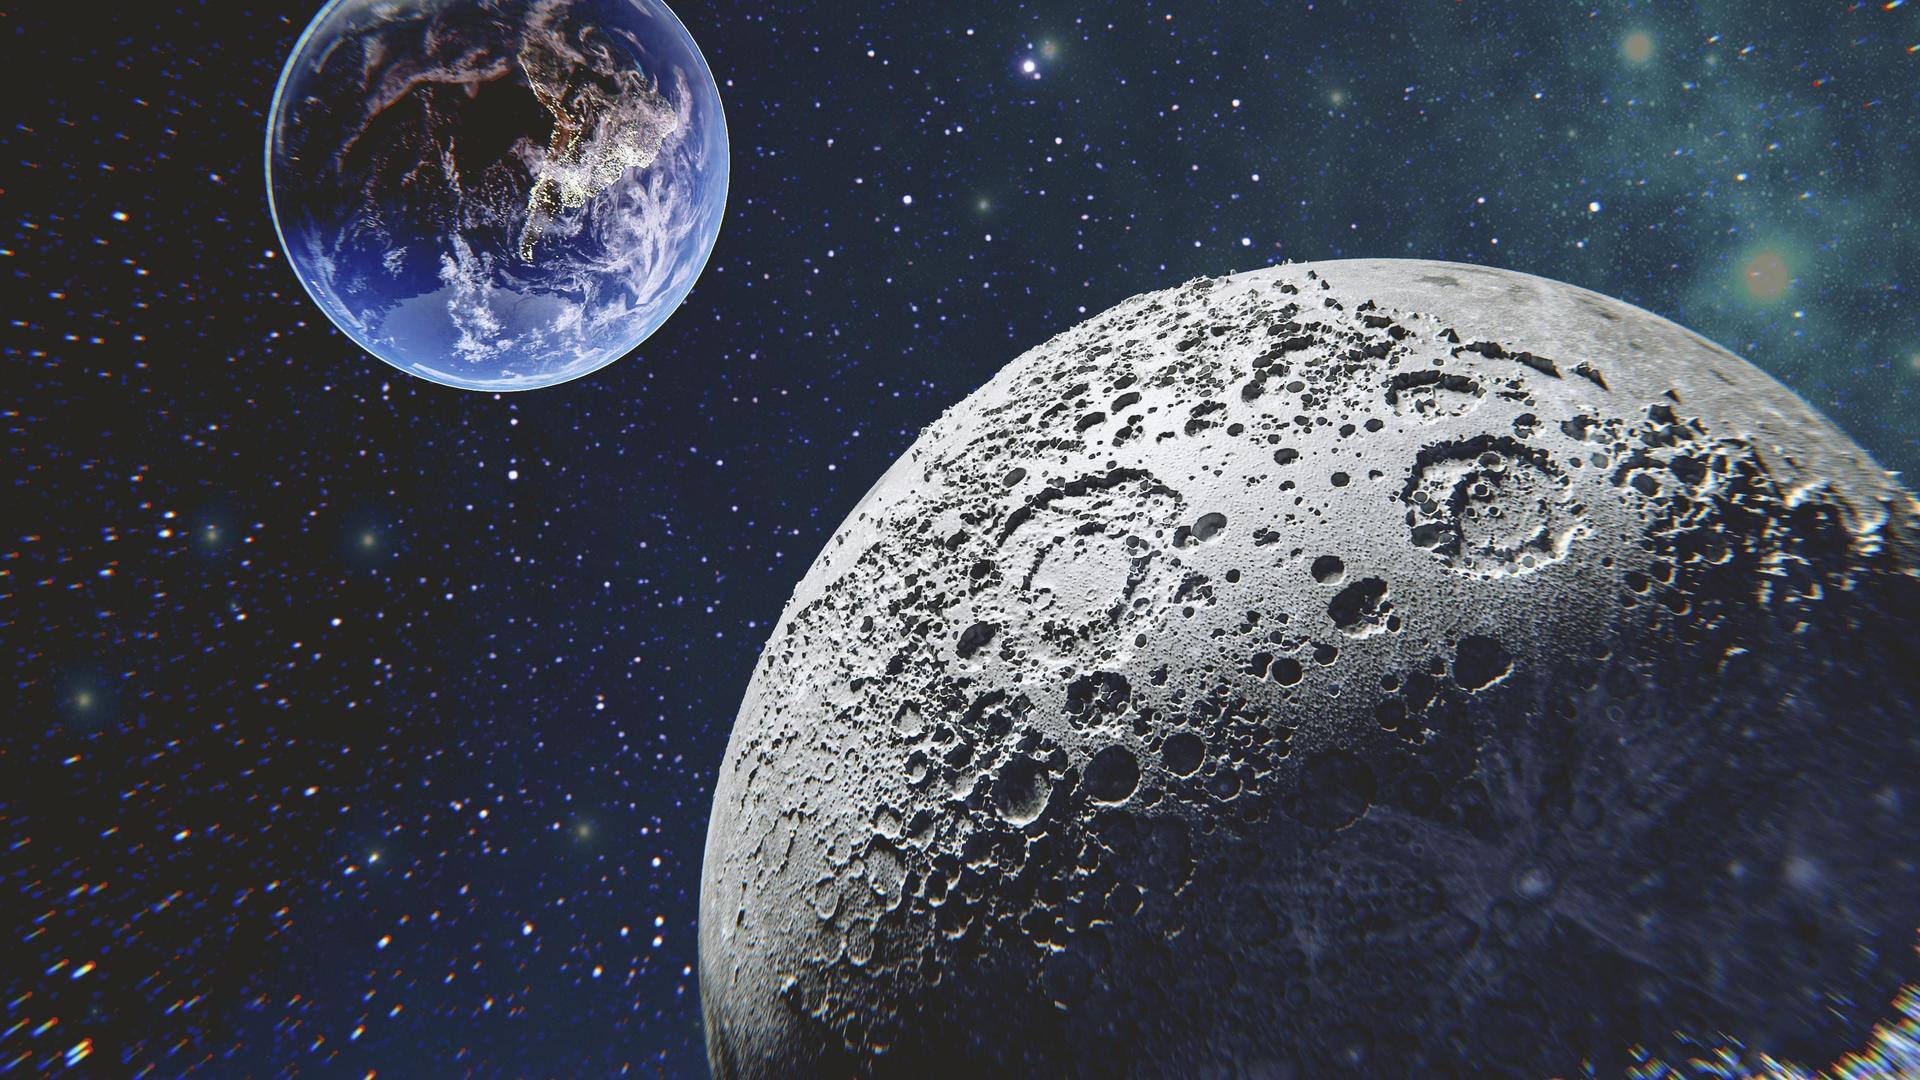 National Moon Day: History, significance, and weird objects found